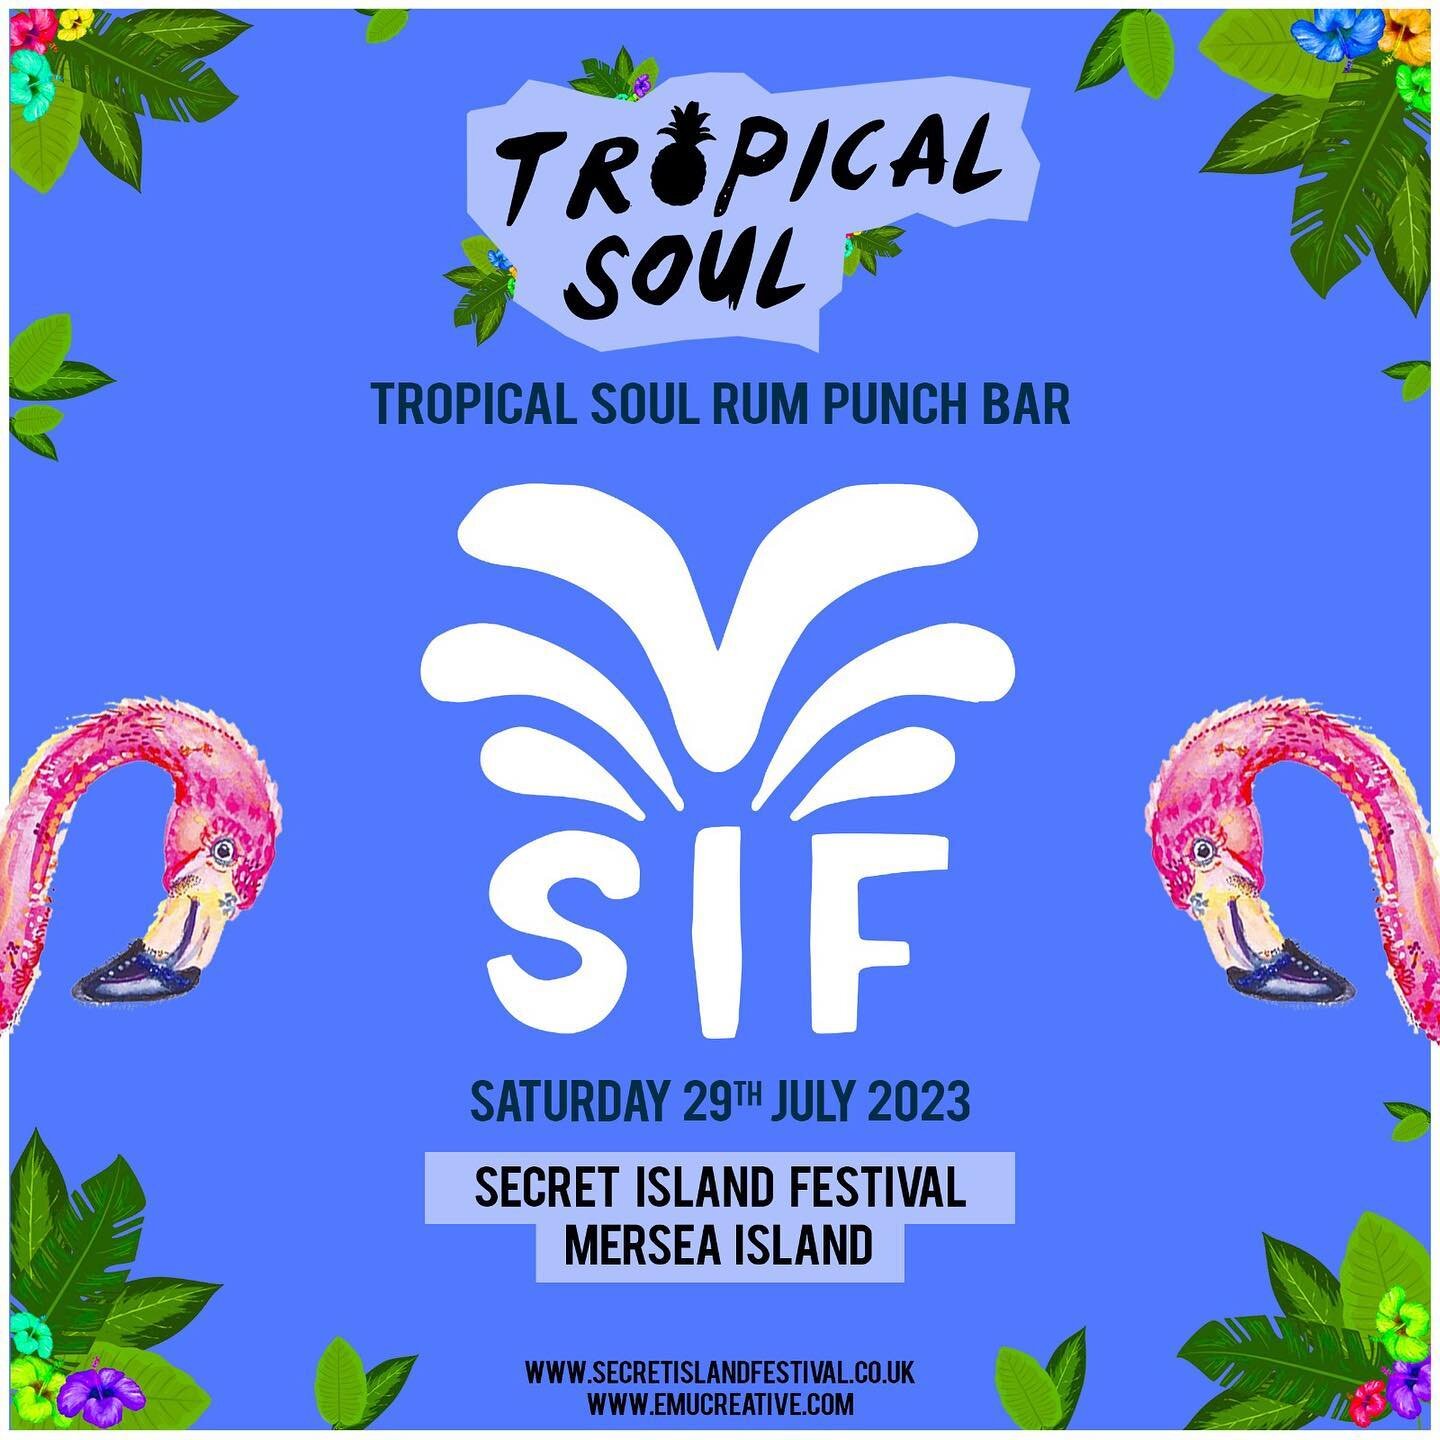 We&rsquo;re stoked to be heading back to one of our favourite events later this month over on Mersea, the incredible @secretislandfestival 🏝️ This years lineup is on fire 🔥 and we can&rsquo;t wait to serve up our Rum Punch goodness 🍹over at their 